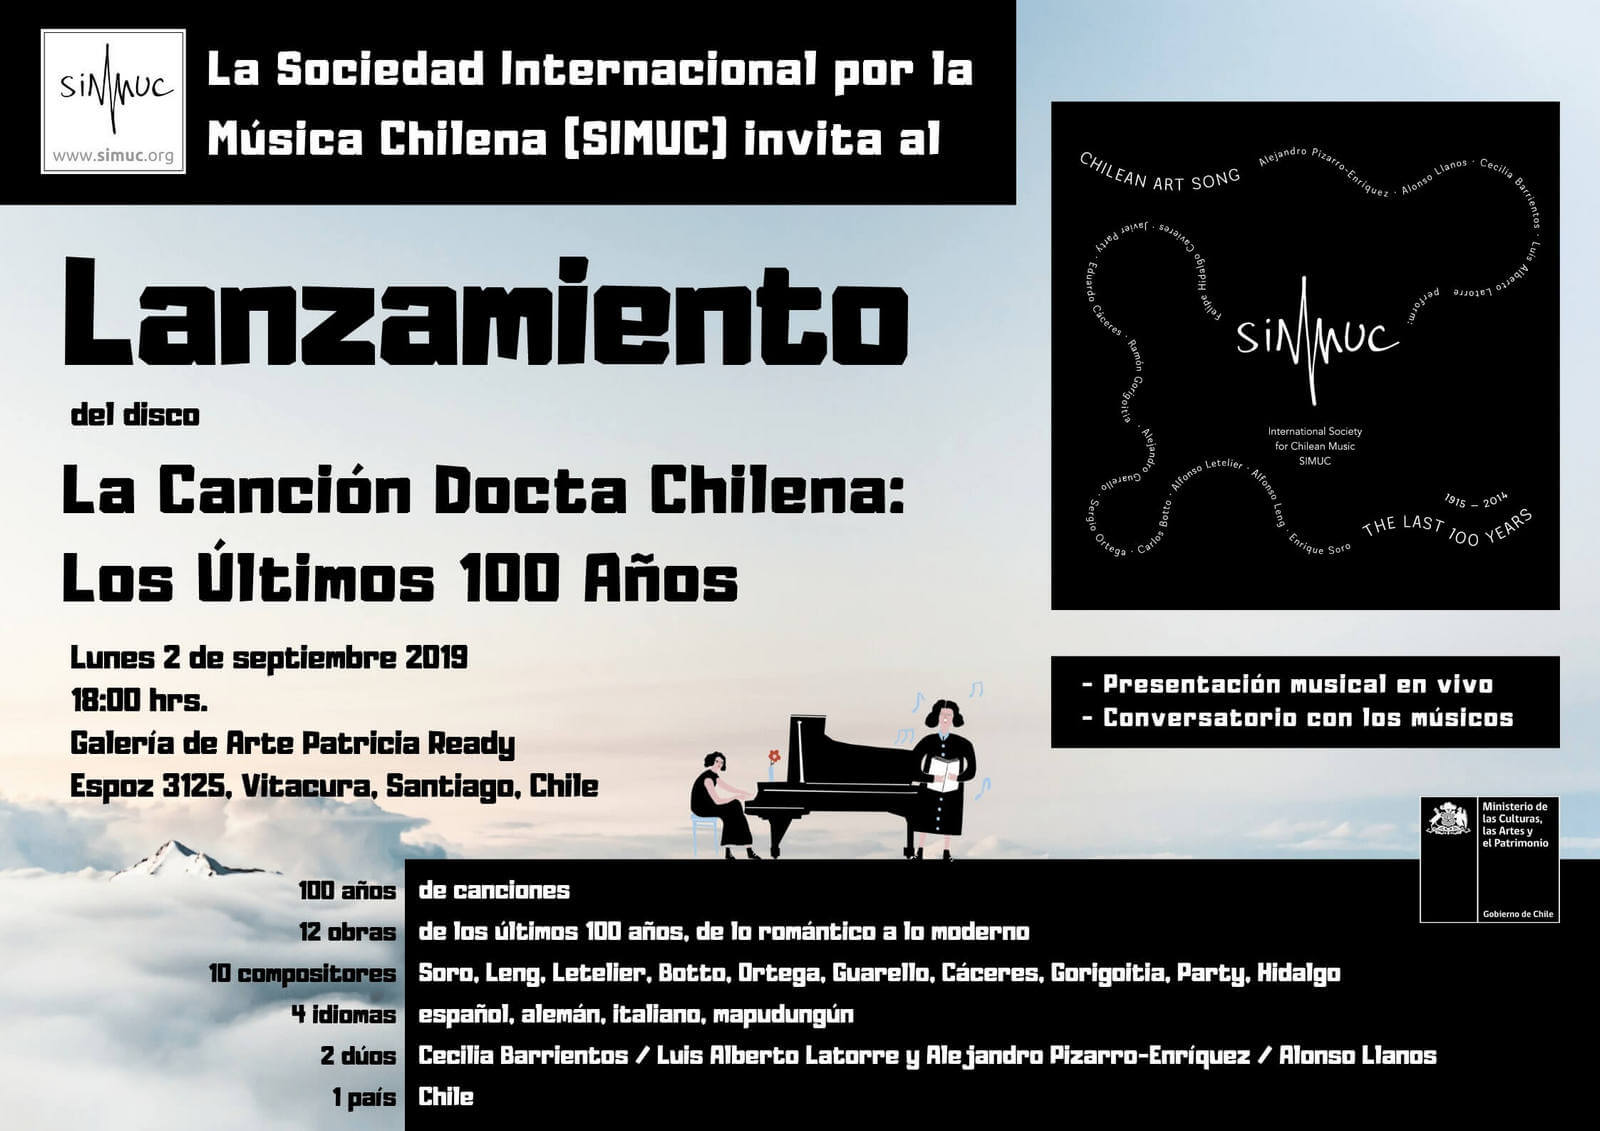 CD Launch in Chile. Chilean Art Song: The Last 100 Years